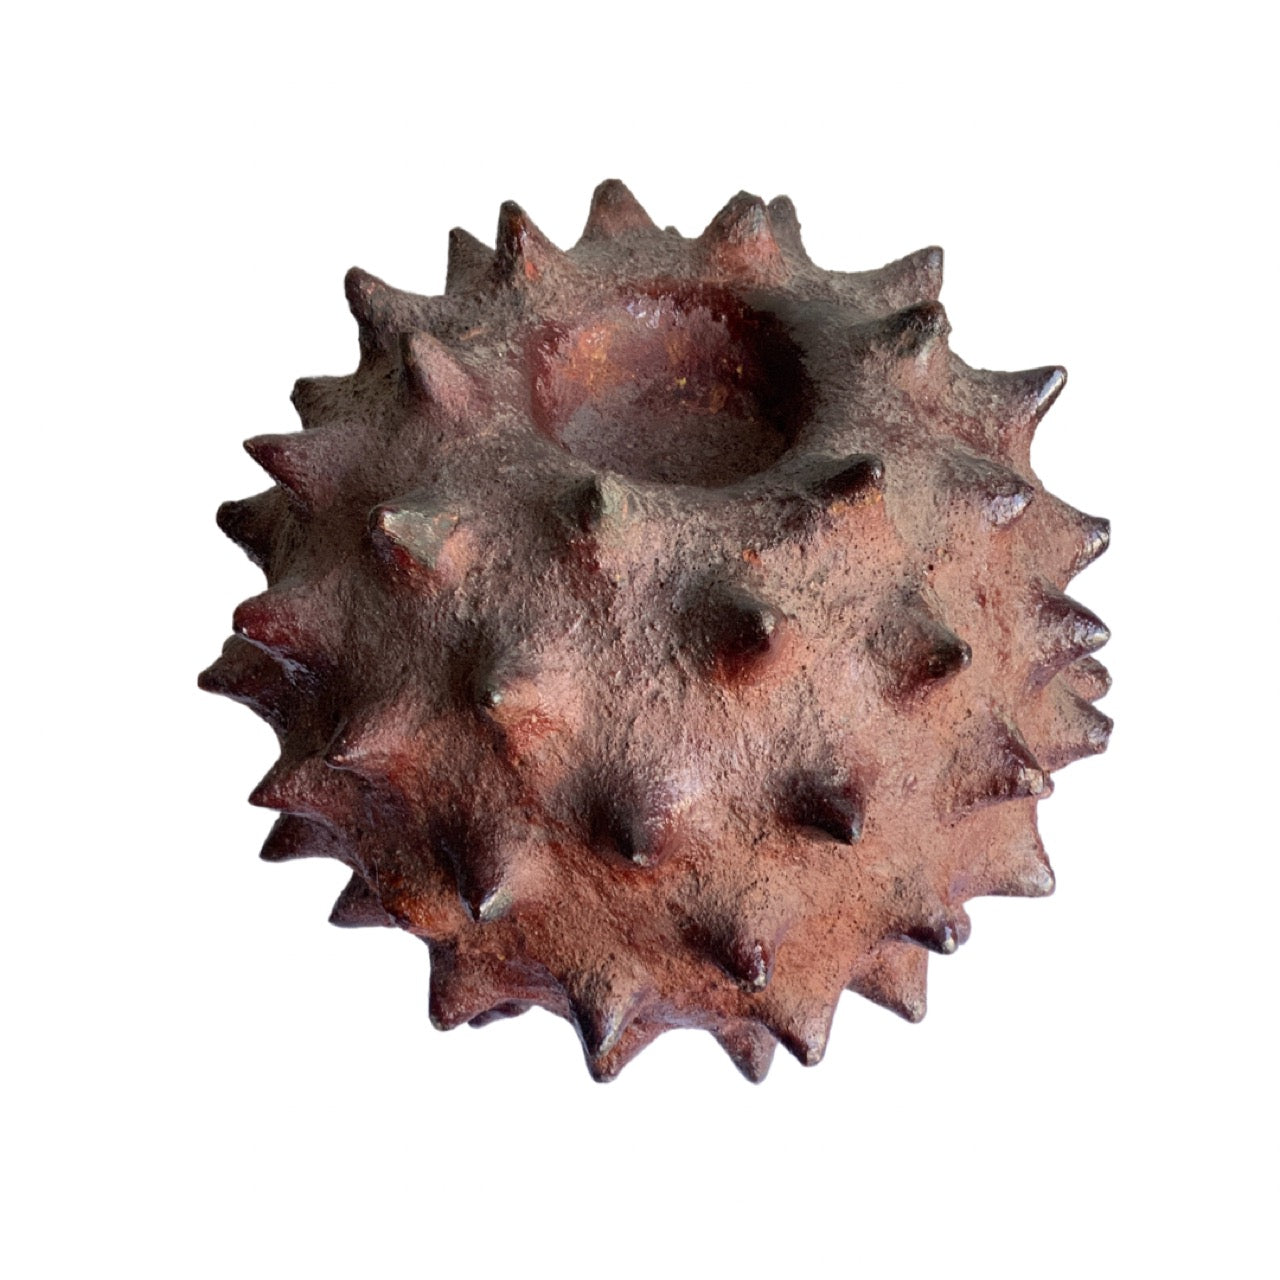 Spiked Ceramic Abstract Sculpture